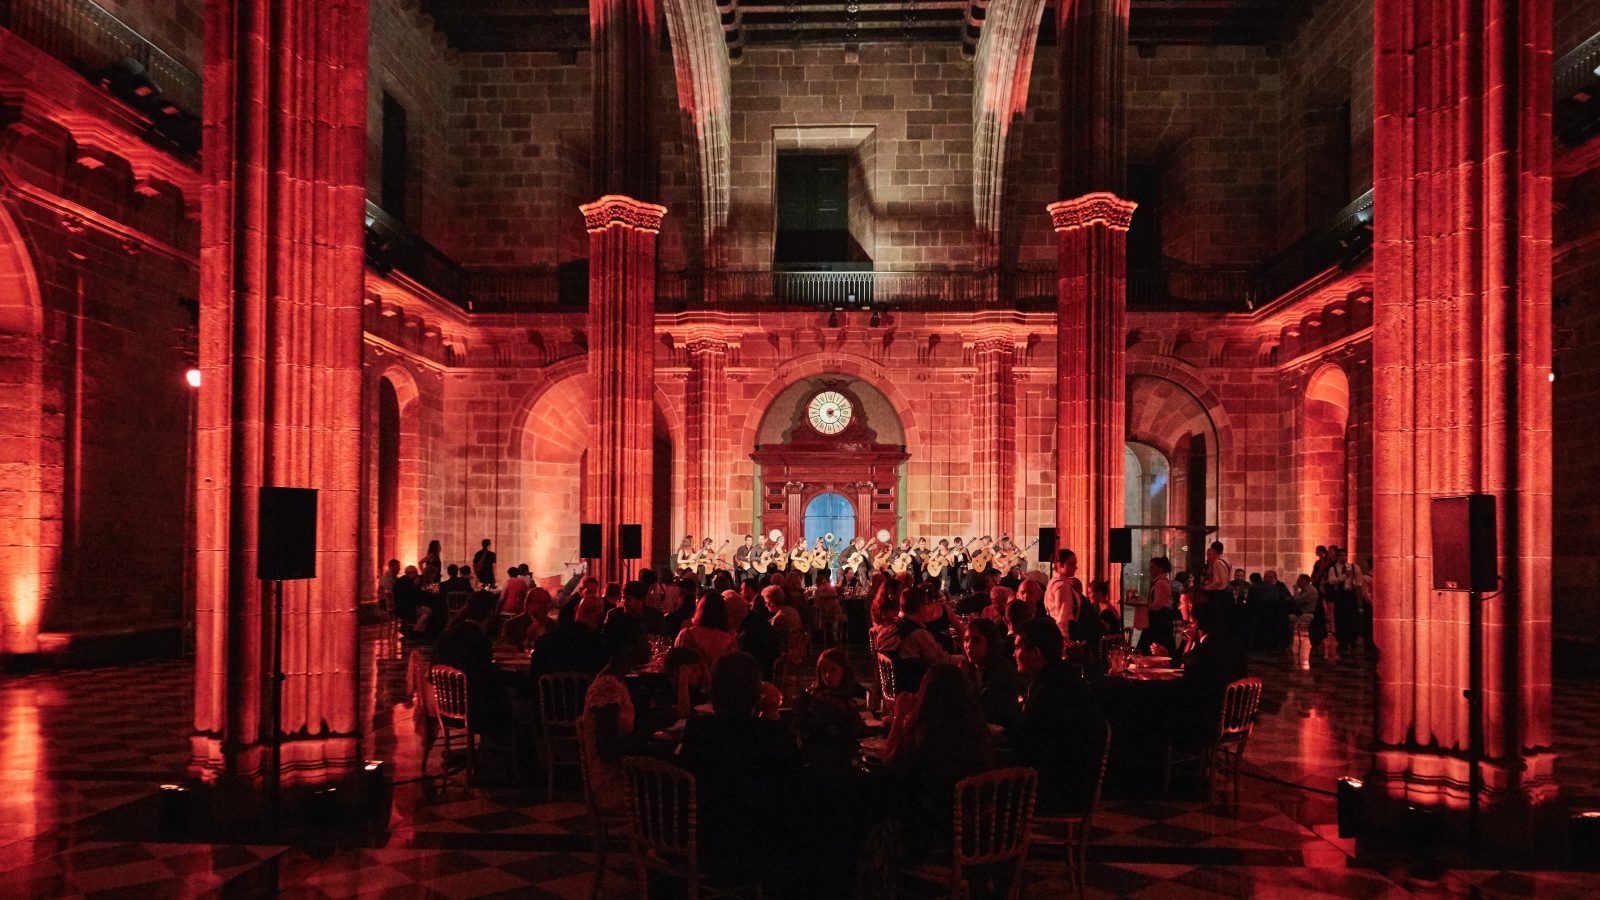 Barcelona classy venue for events with red lighting setup